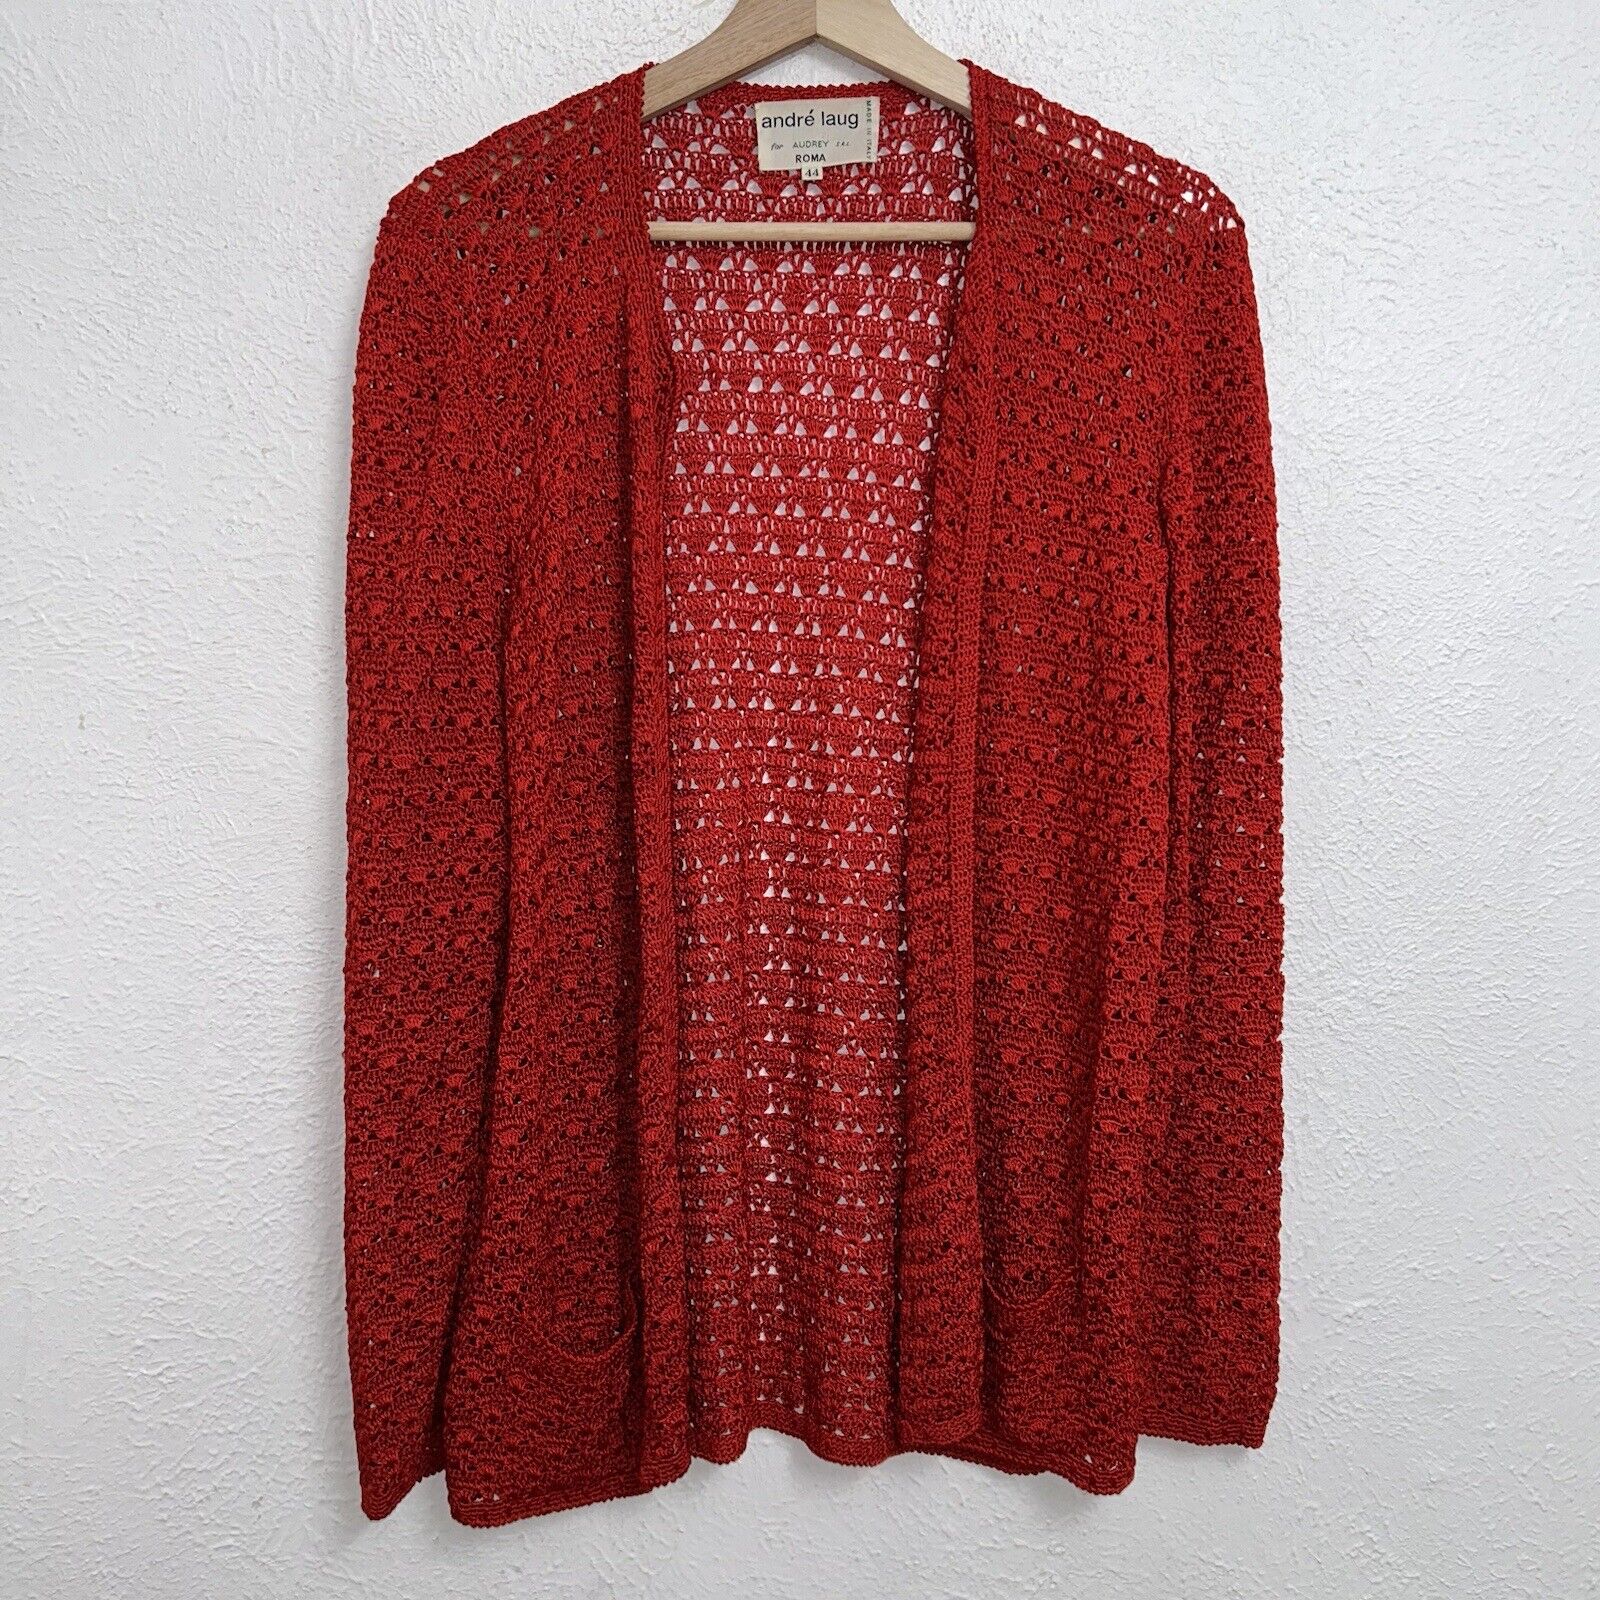 Vintage Andre Laug Audrey S.R.L. Roma Crochet Knited Red Cardigan Women’s 44